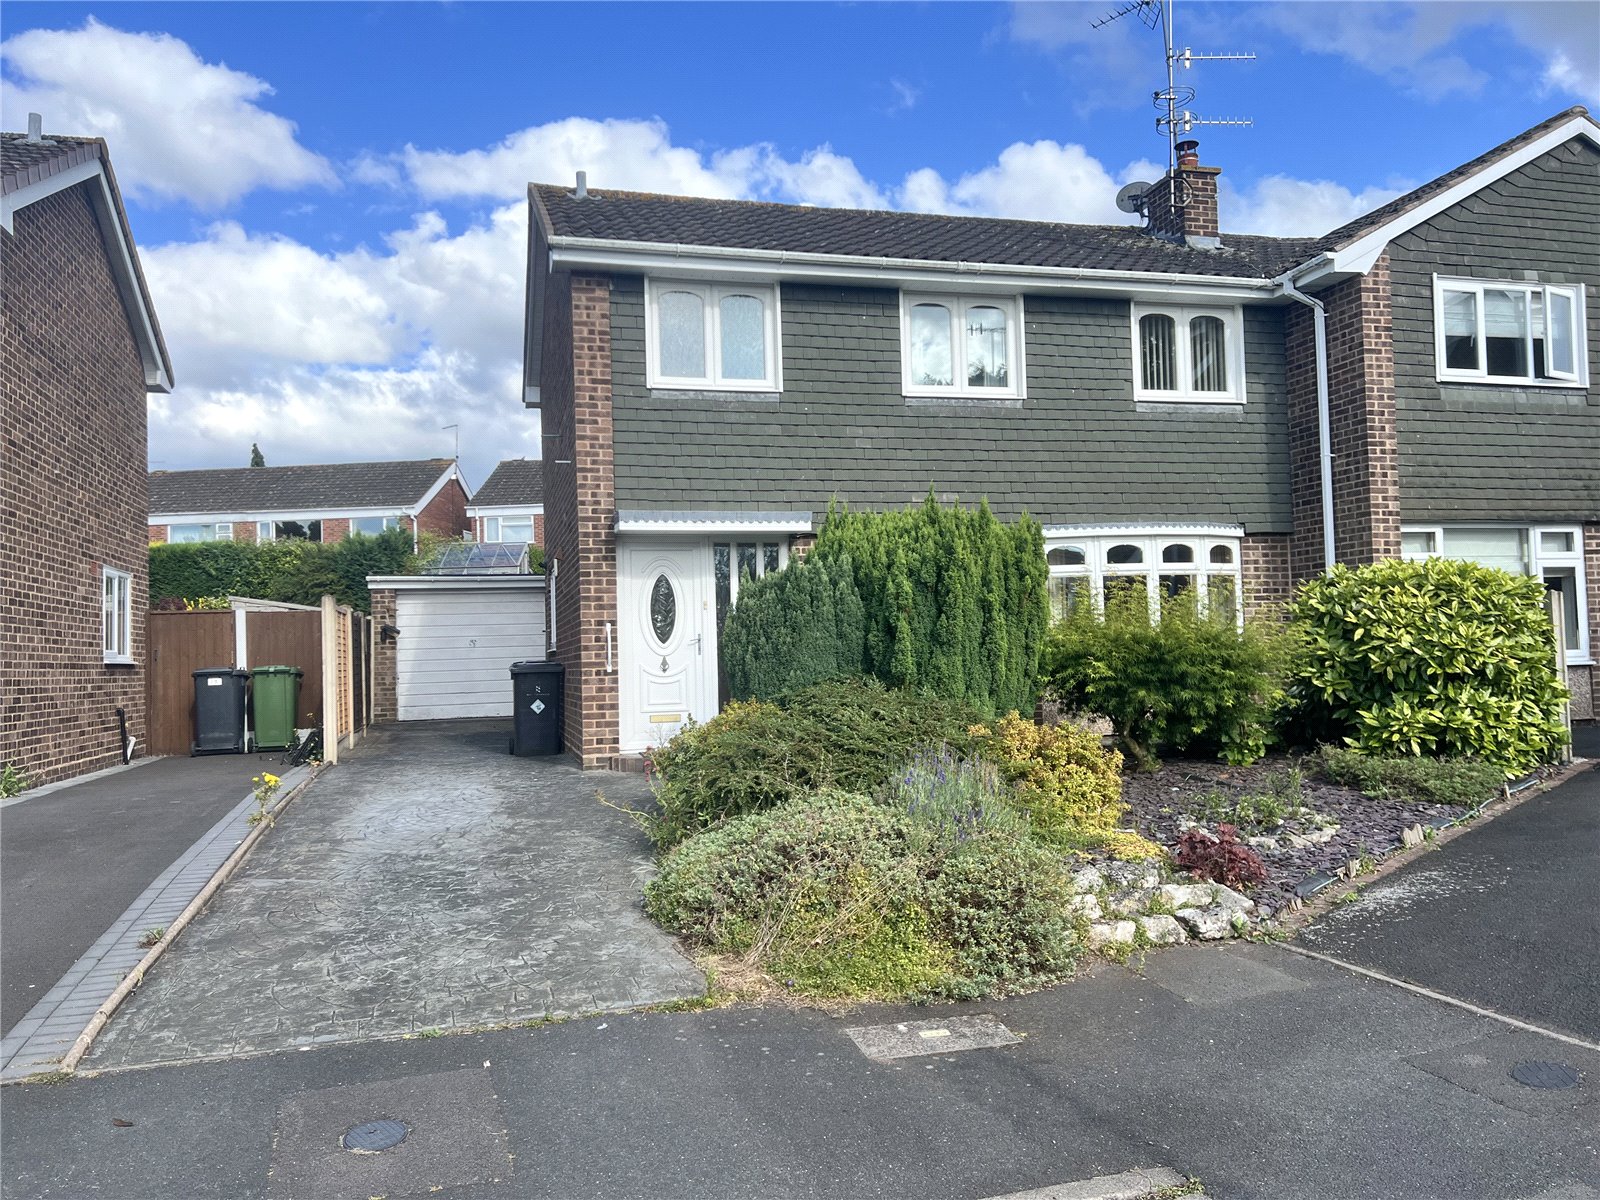 Aster Avenue, Kidderminster, Worcestershire, DY11